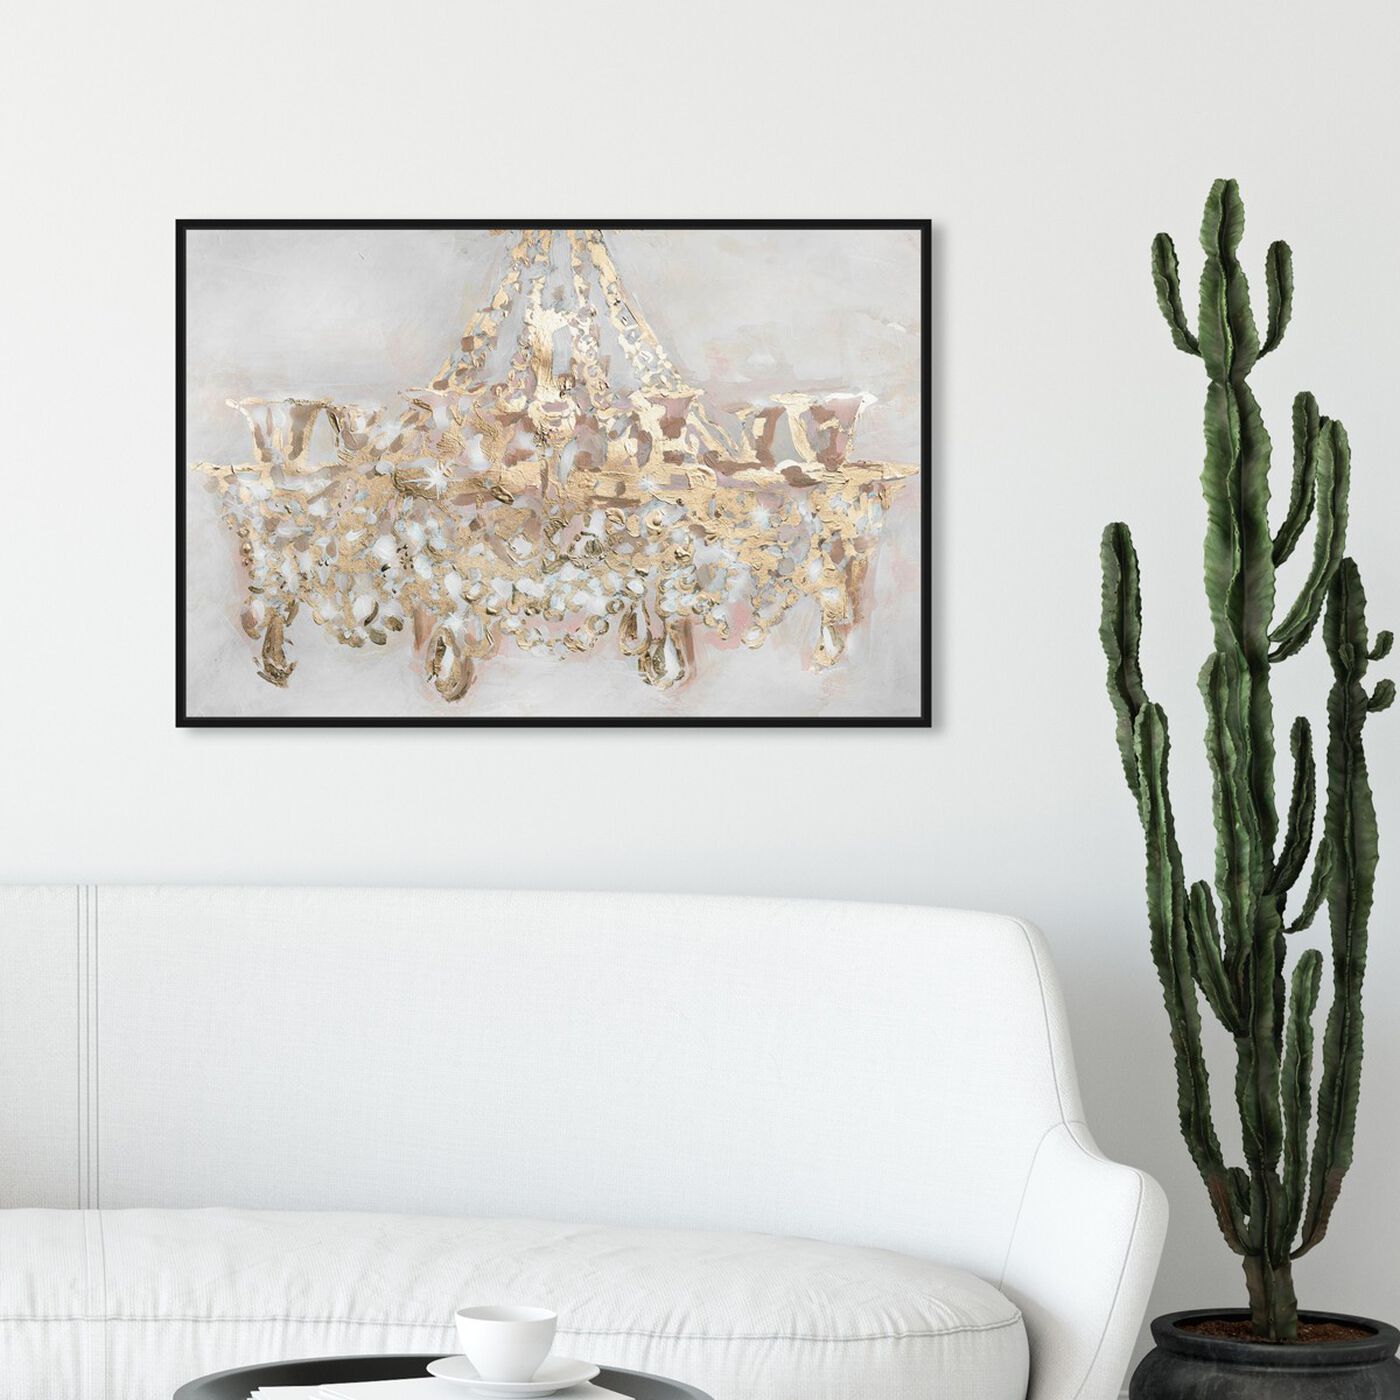 Hanging view of Candelabro featuring fashion and glam and chandeliers art.